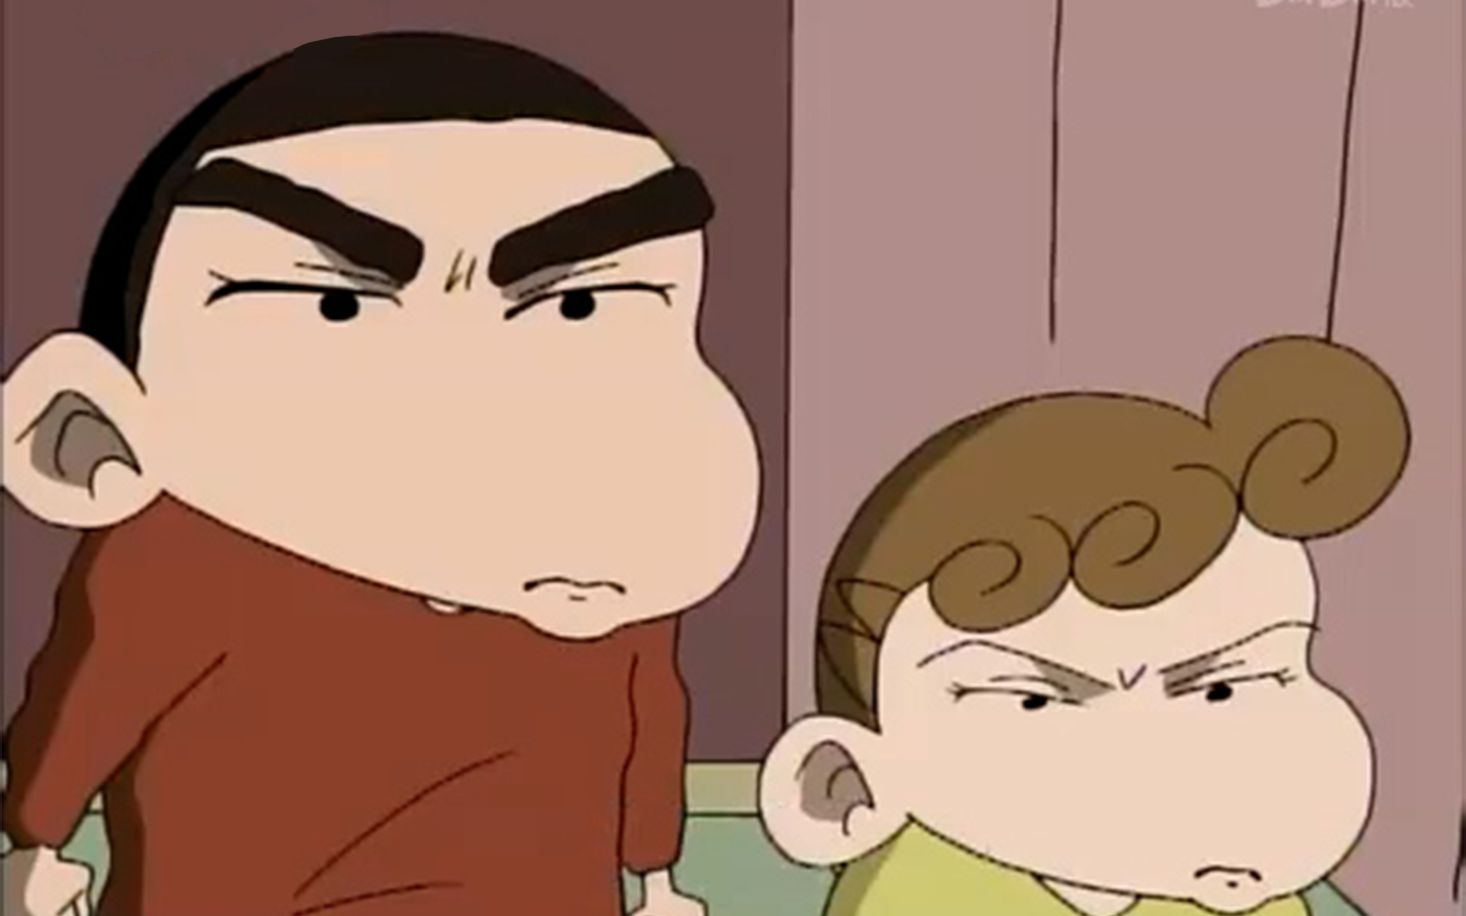 Funny editing | Deleted scenes from Crayon Shin-chan - Bilibili